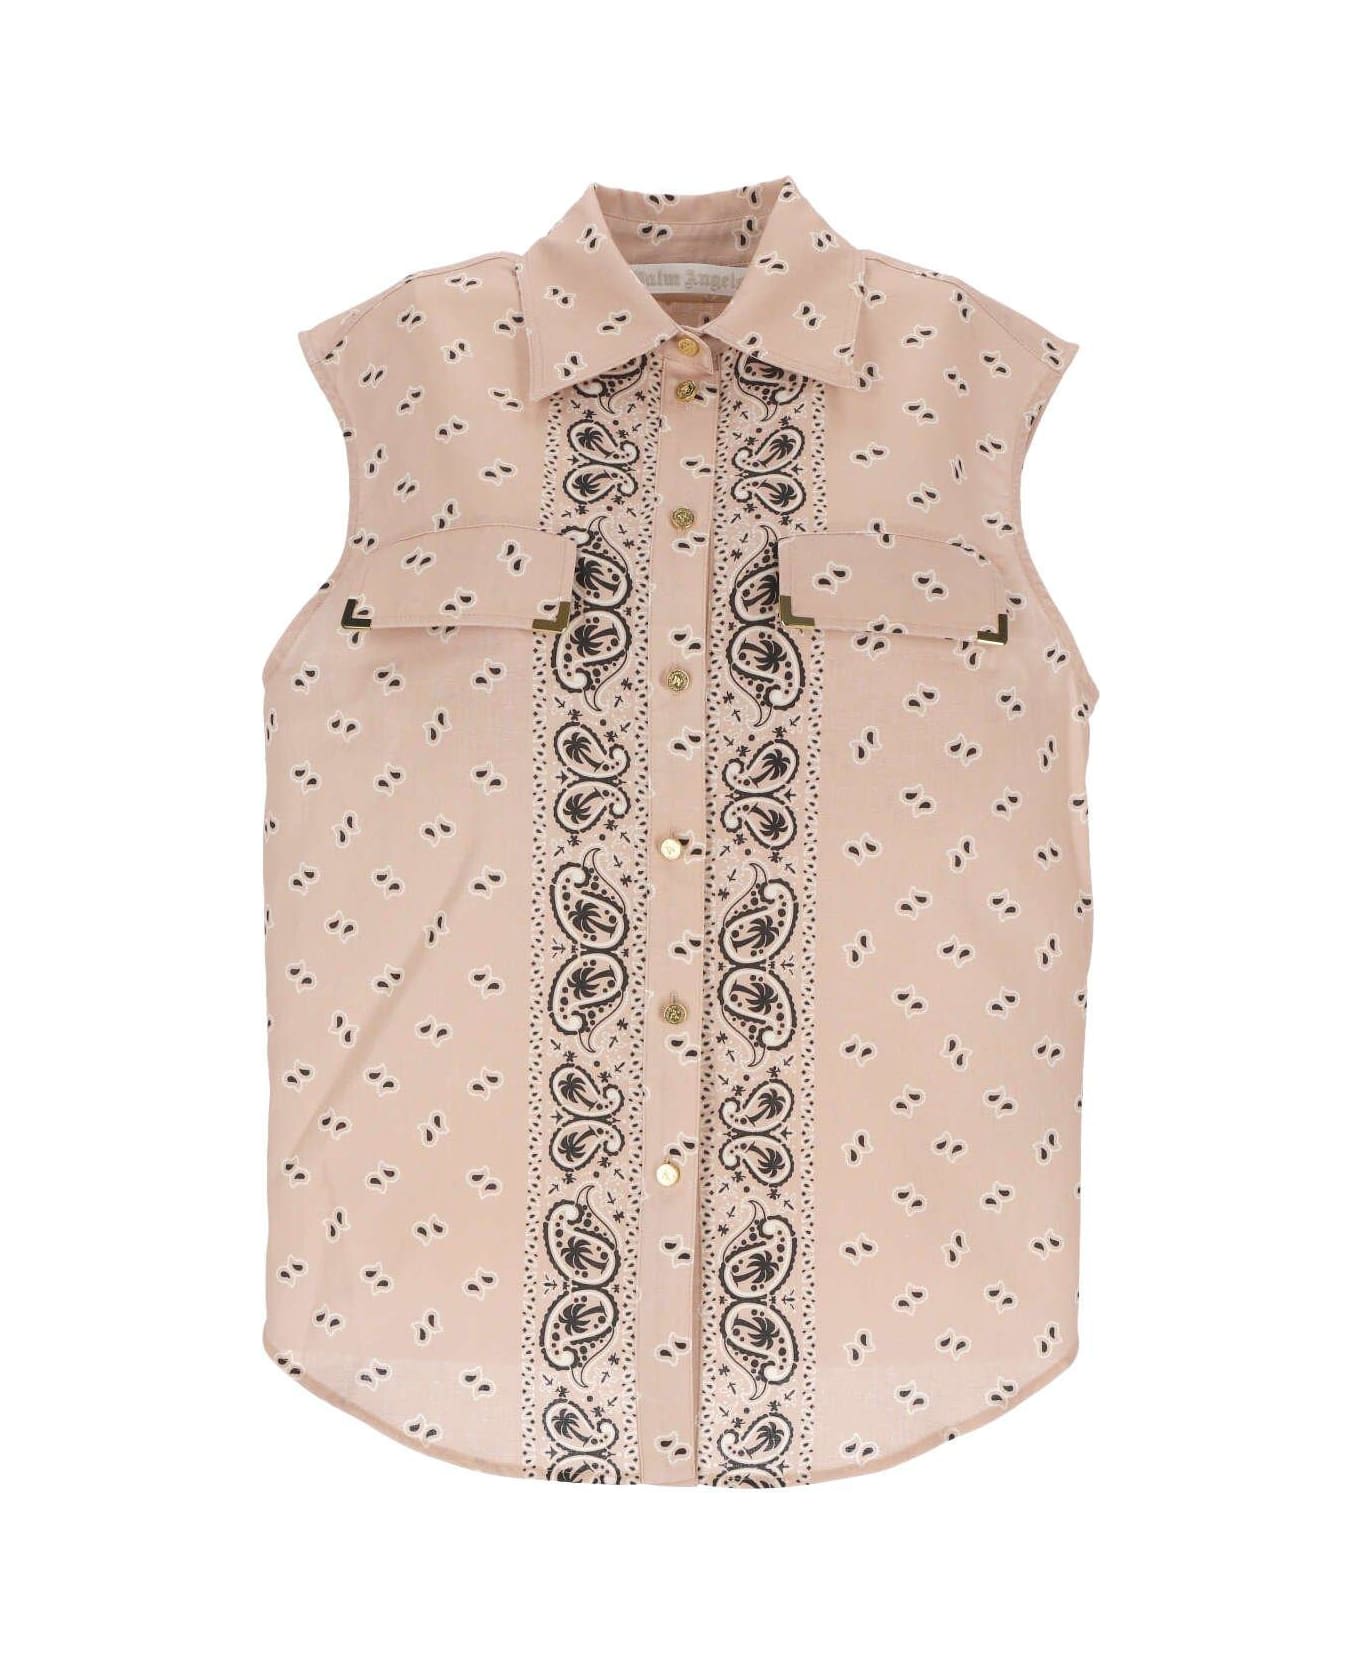 Palm Angels All-over Patterned Sleeveless Top - pink トップス